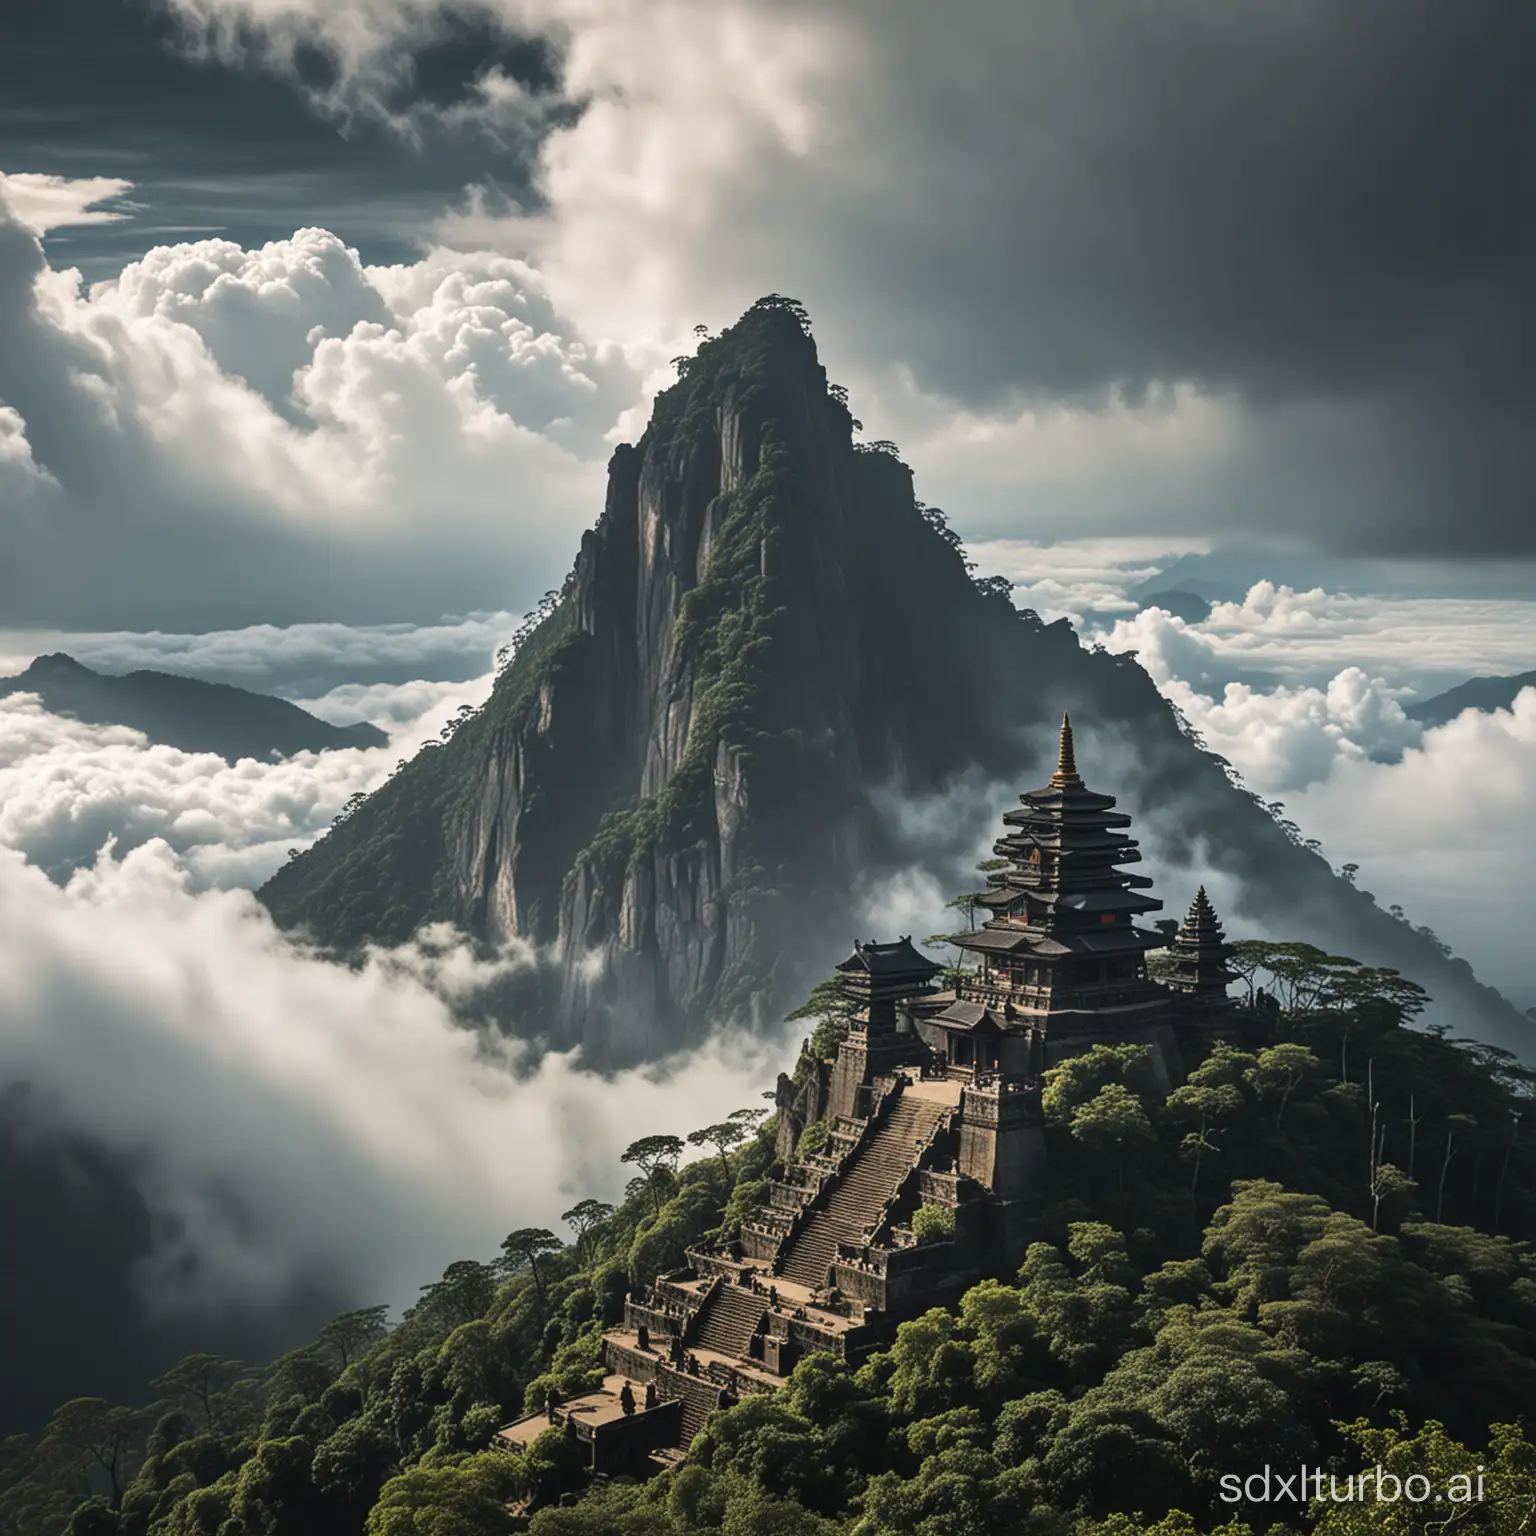 Ancient-Stone-Temple-at-the-Summit-of-a-Towering-Black-Mountain-Range